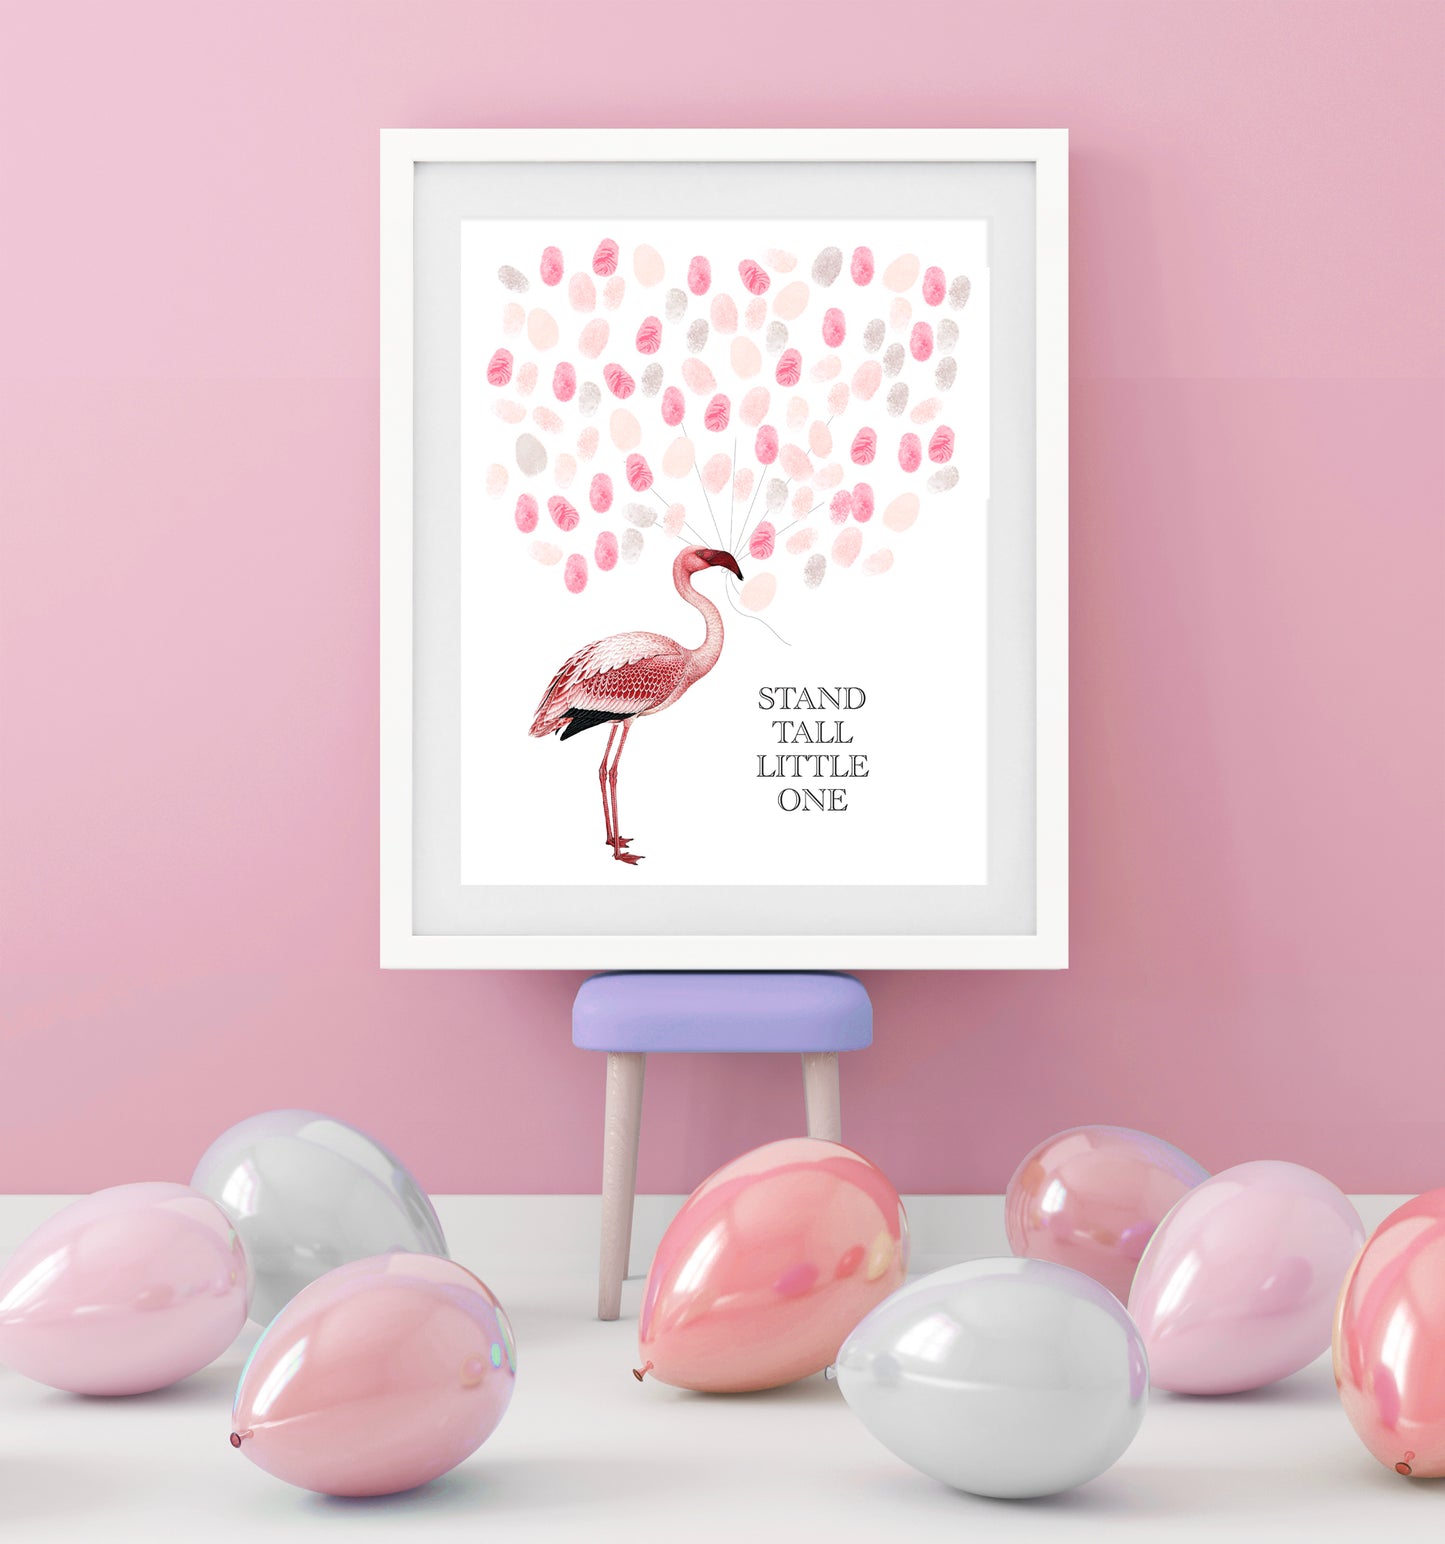 pink party room with flamingo guest book print in frame featuring a beautiful vintage flamingo illustration holding guests fingerprints as balloons